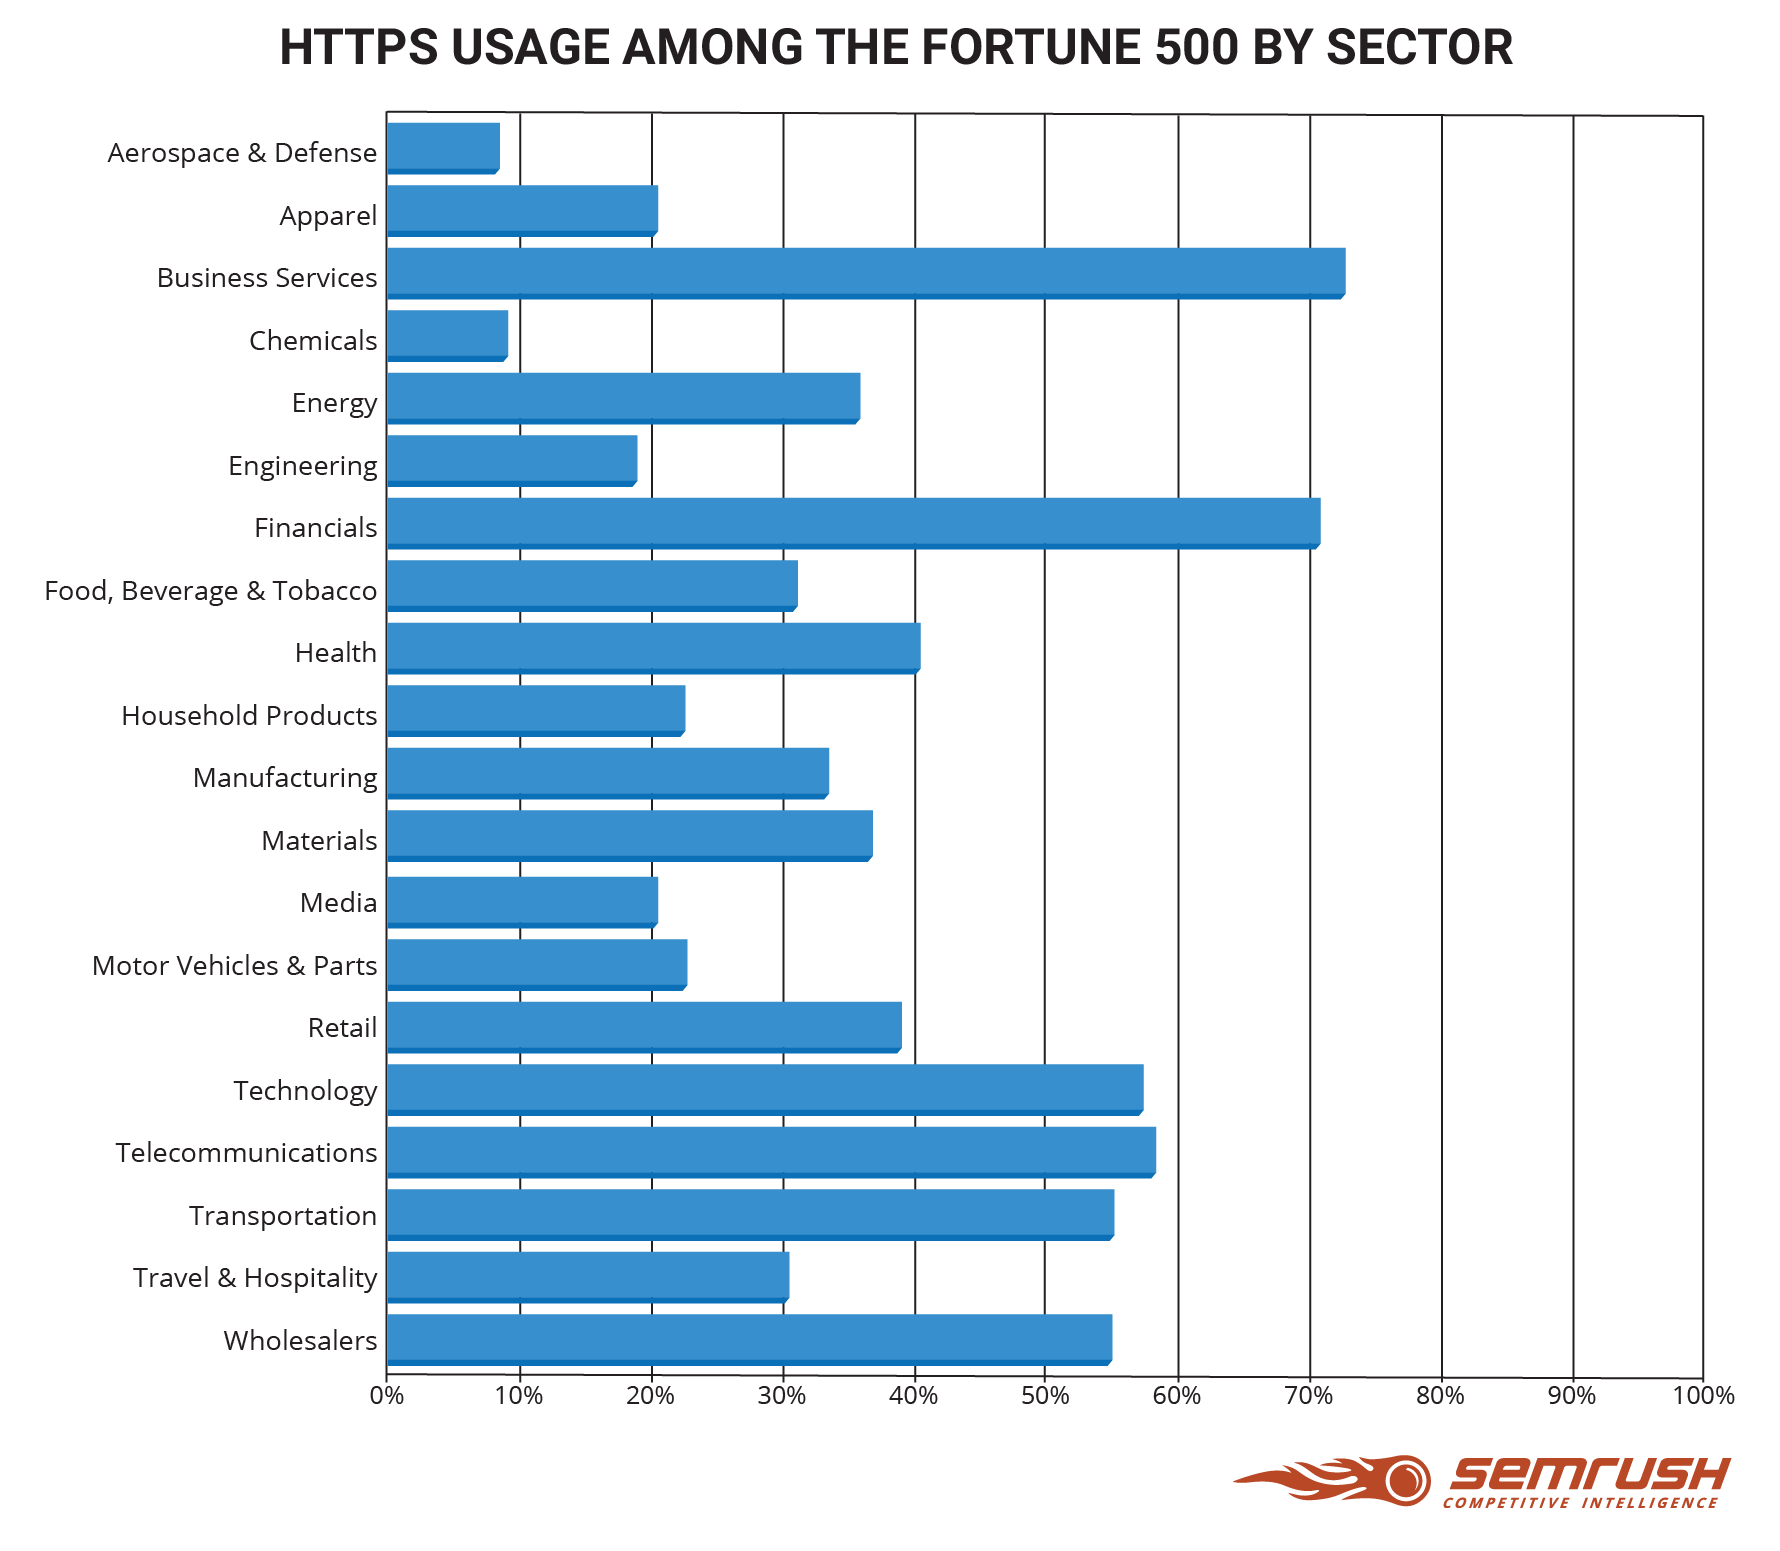 HTTPS usage among the Fortune 500 by sector